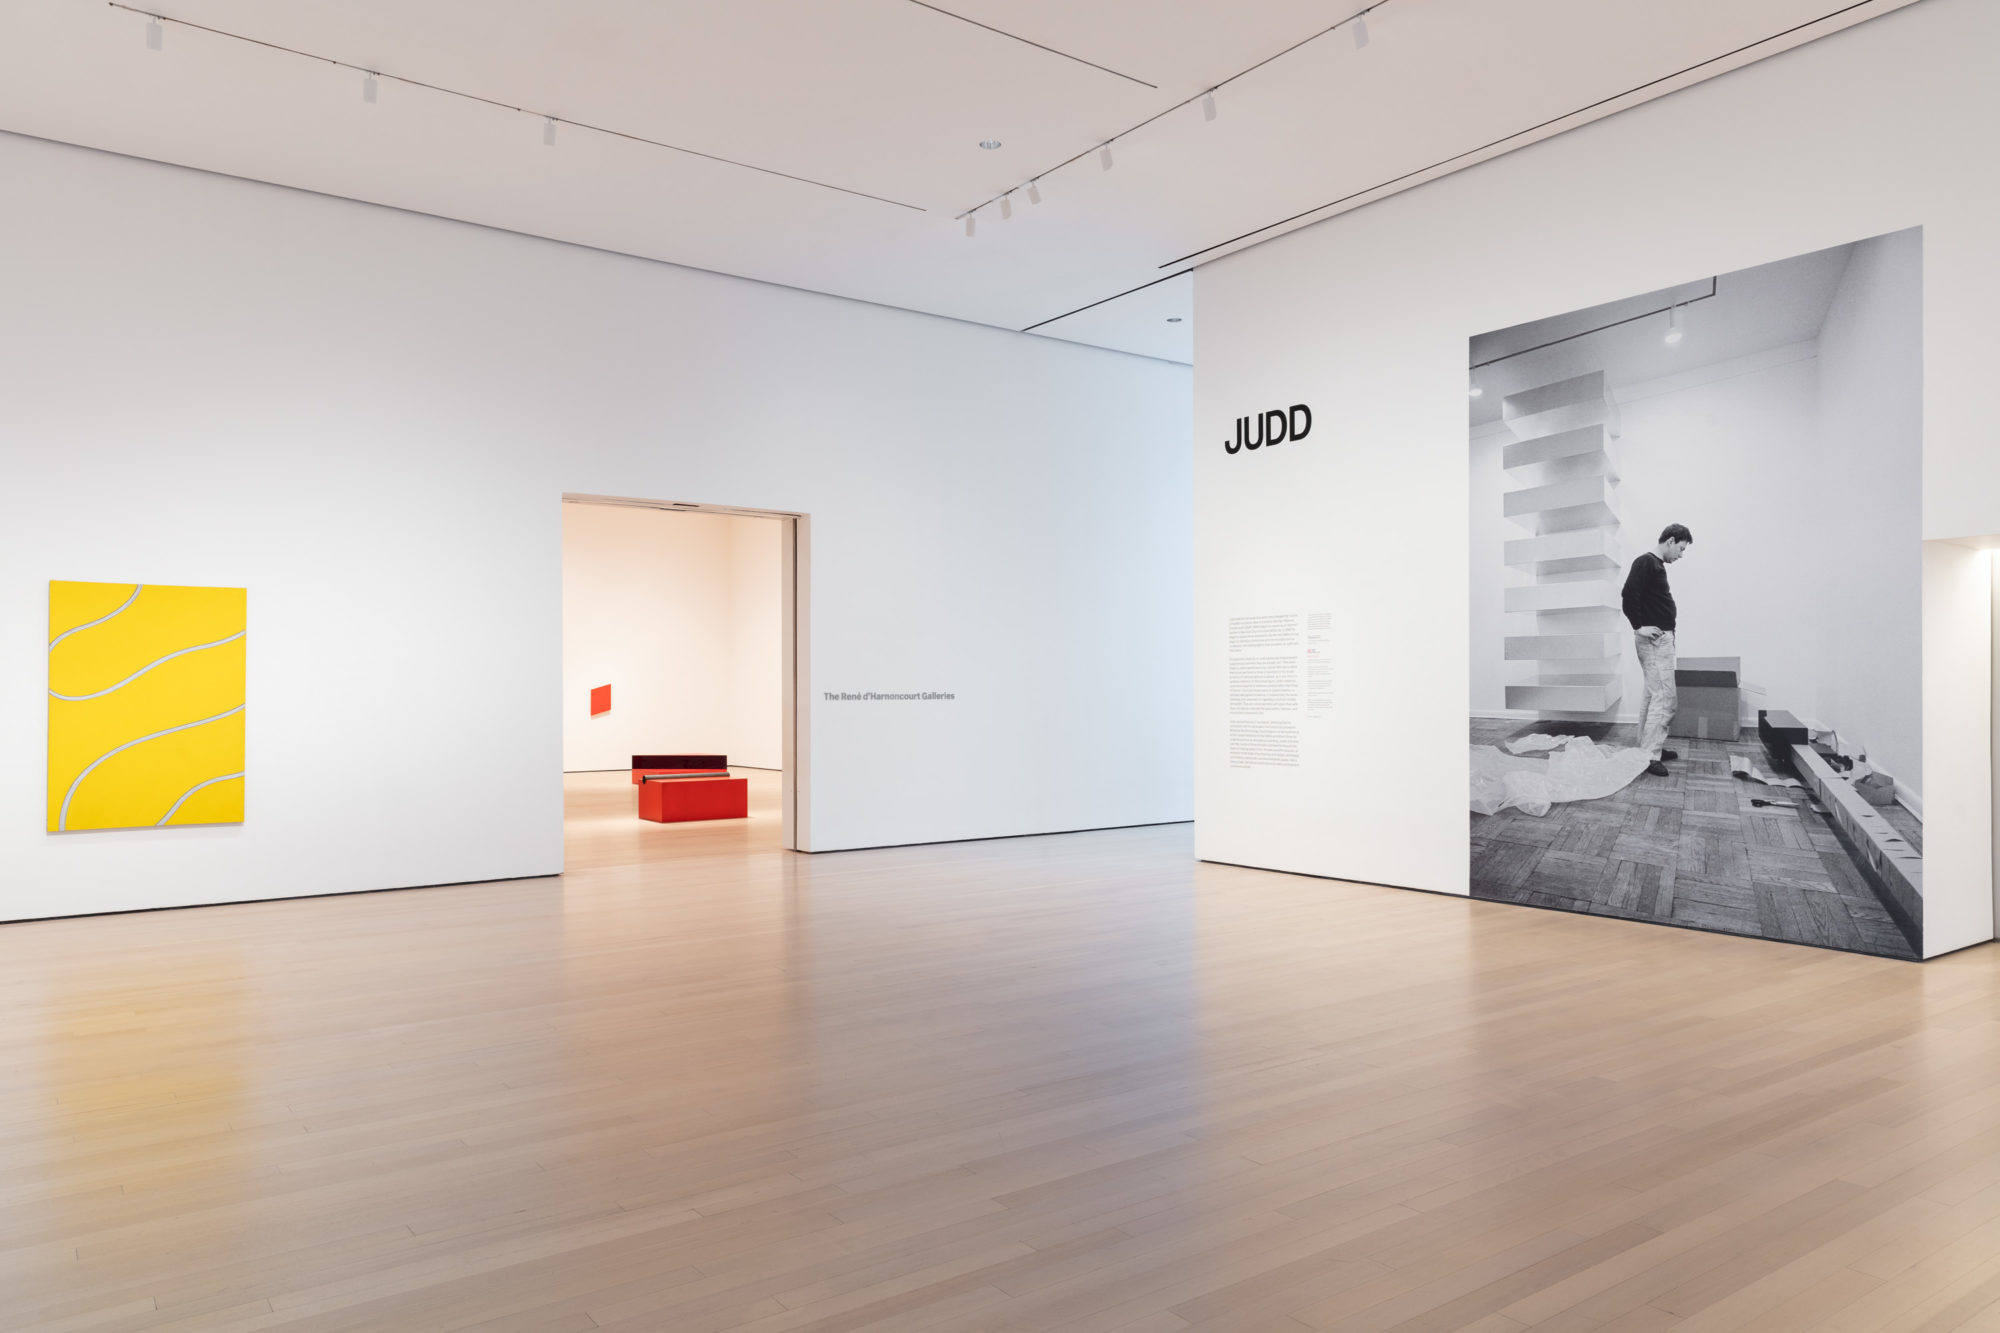 Installation view of Judd, The Museum of Modern Art, New York, March 1–July 11, 2020. Digital Image © 2020 The Museum of Modern Art, New York. Photo by Jonathan Muzikar